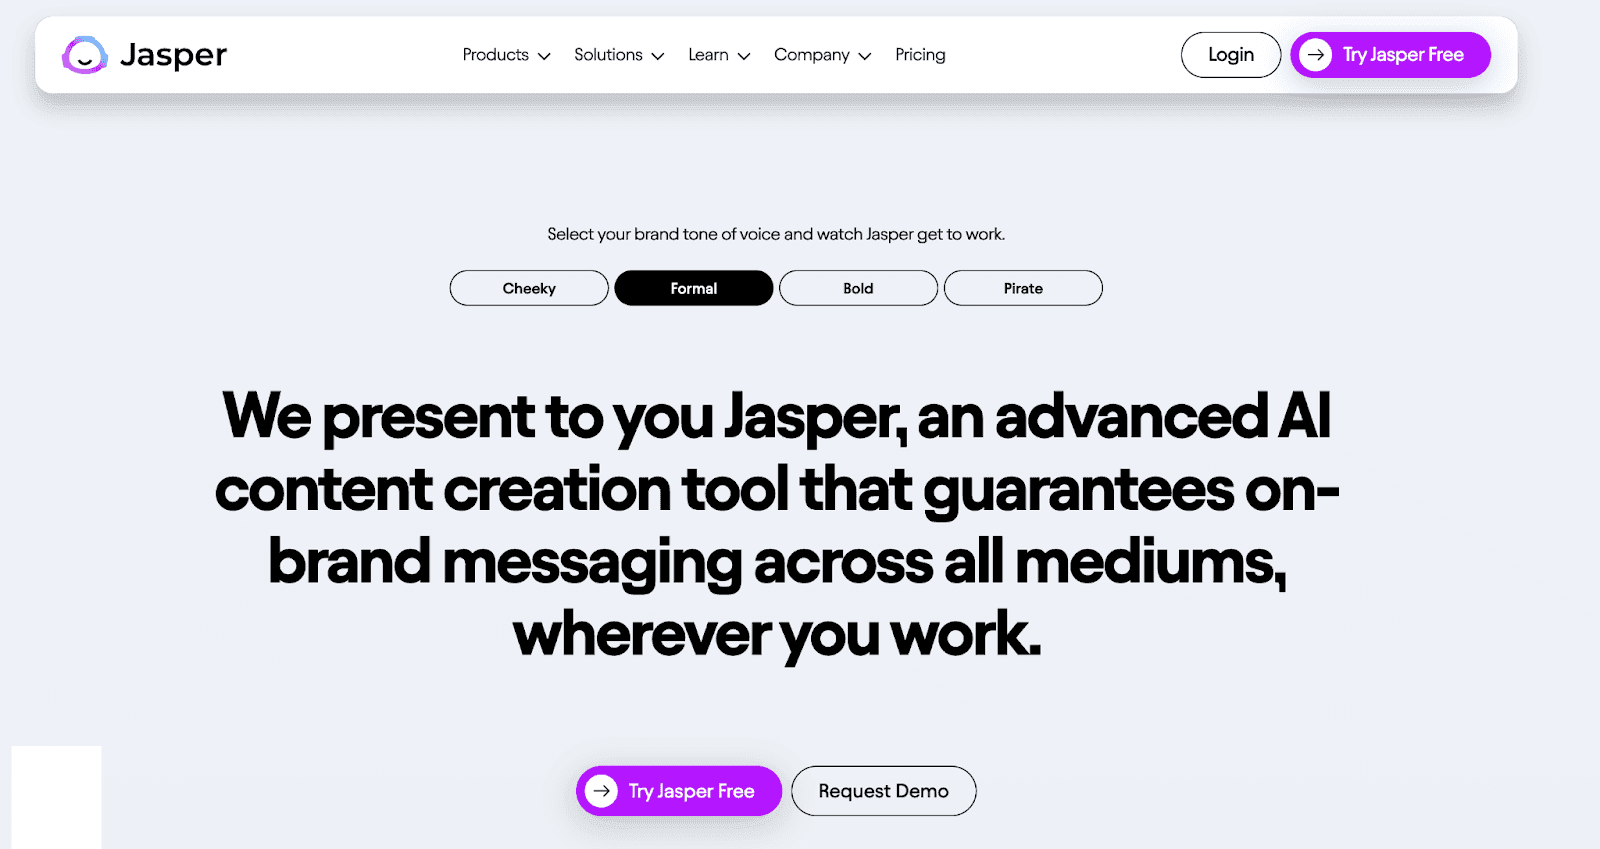 Jasper website - We present to you Jasper, an advanced AI content creation tool that guarantees on-brand messaging across all mediums